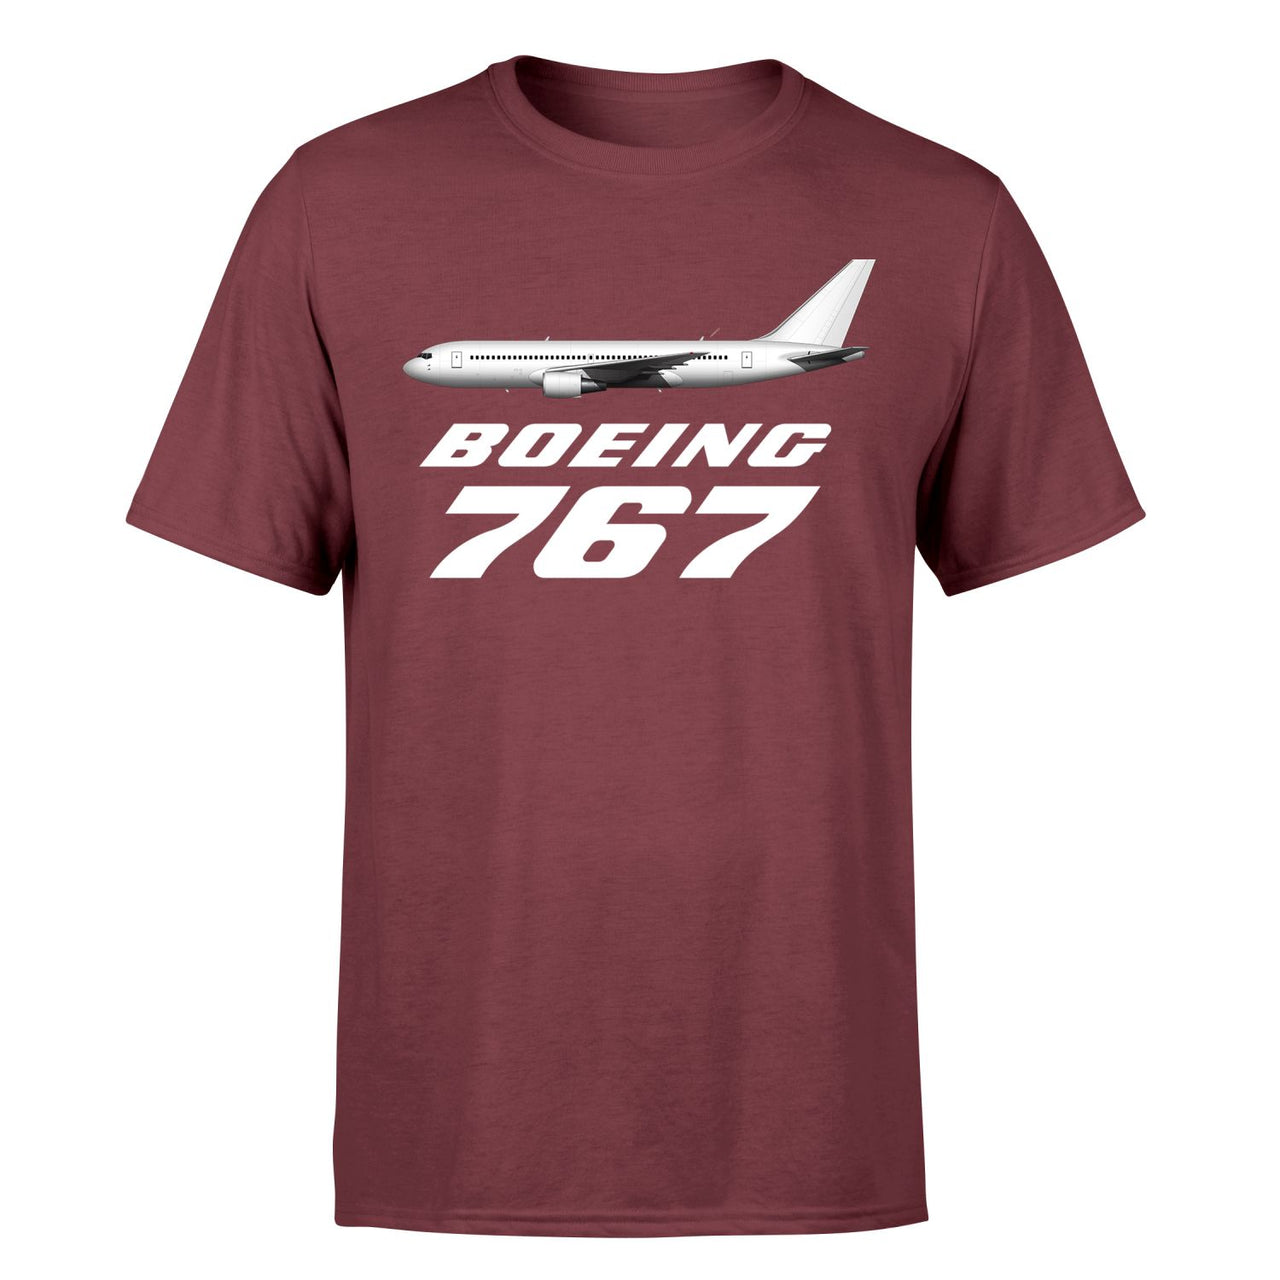 The Boeing 767 Designed T-Shirts